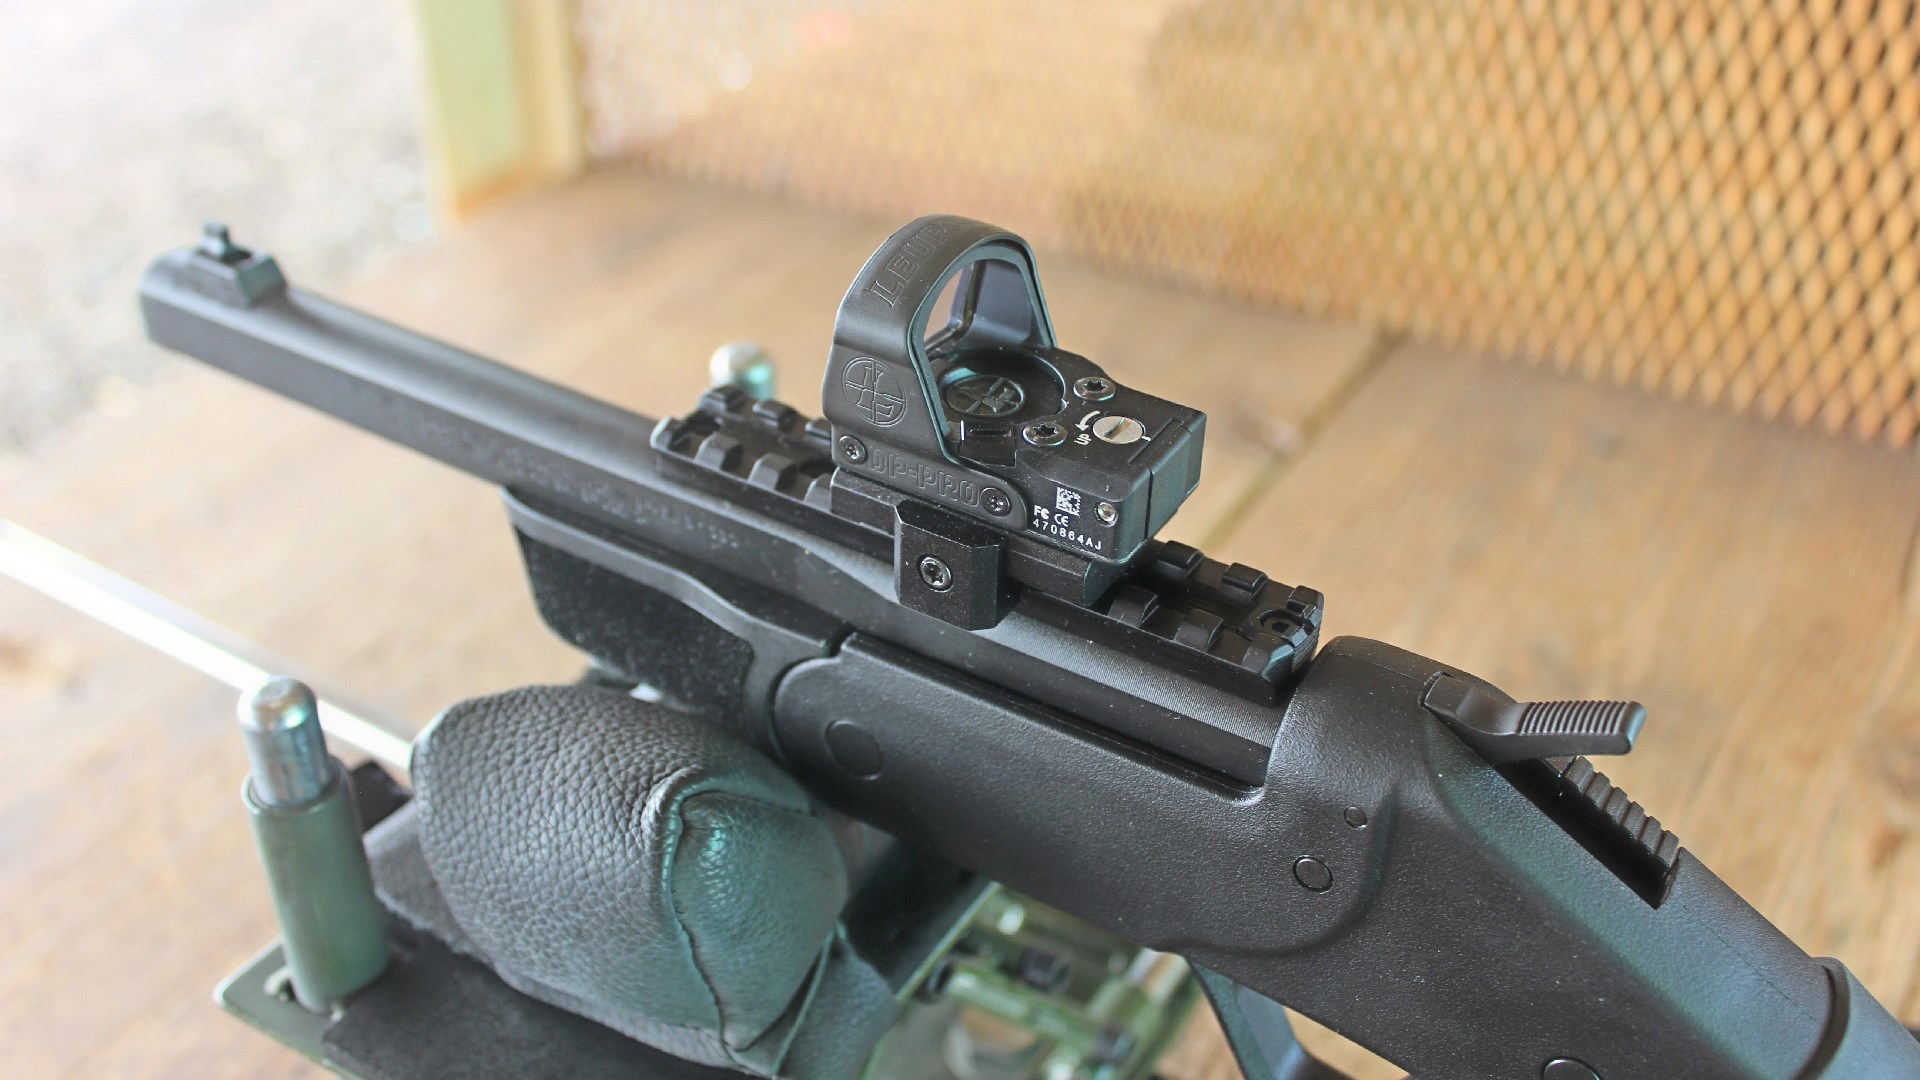 Rossi Brawler shown on bench with Leupold Delta Point Pro red-dot optic mounted on Picatinny rail top-down view wood table